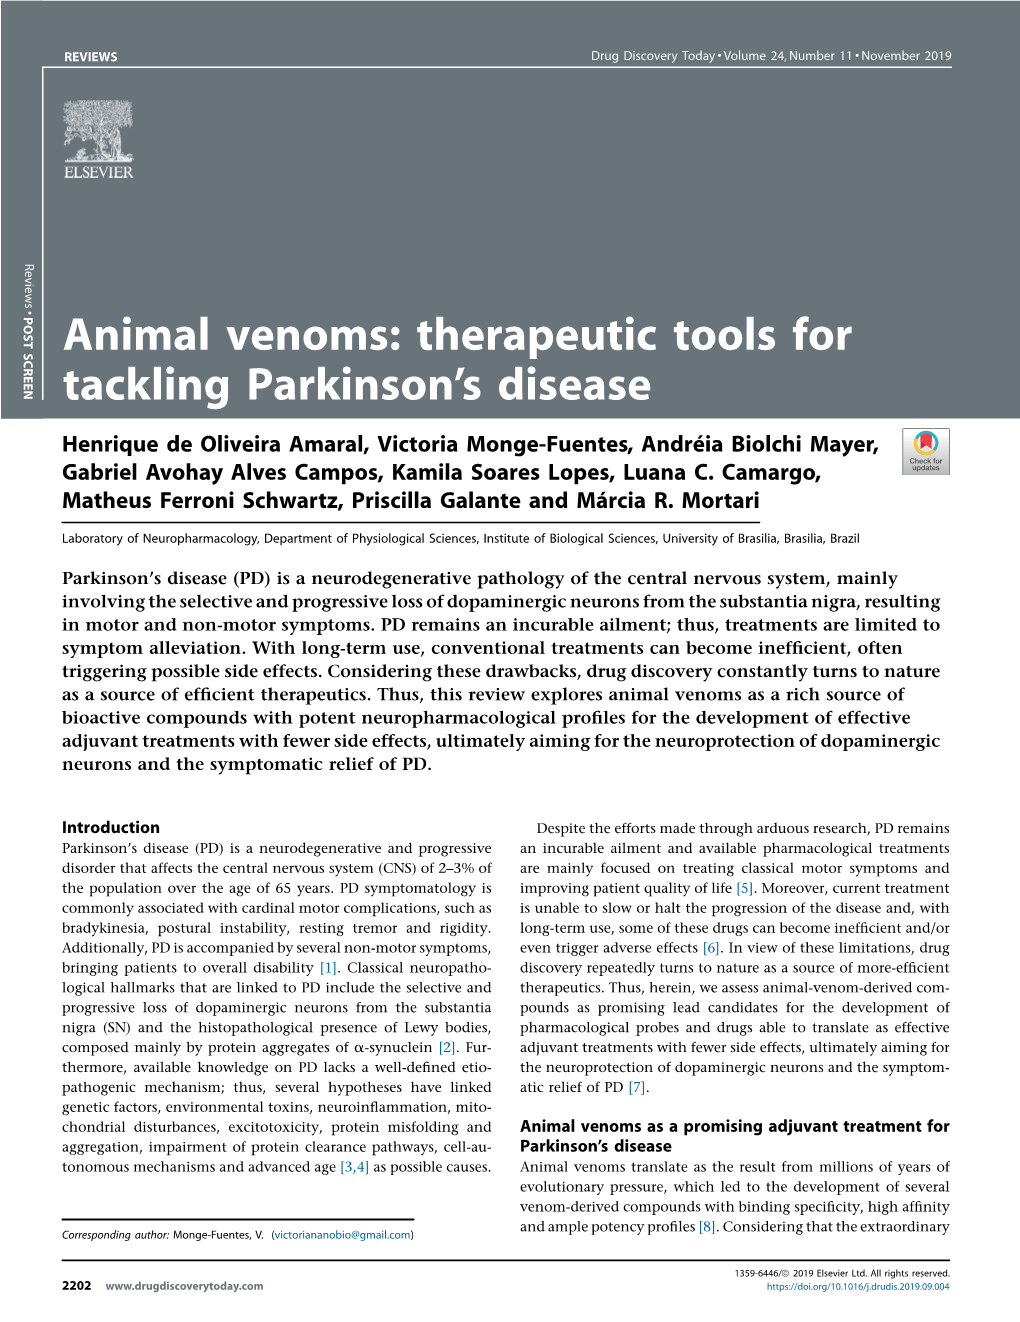 Animal Venoms: Therapeutic Tools for Tackling Parkinson's Disease